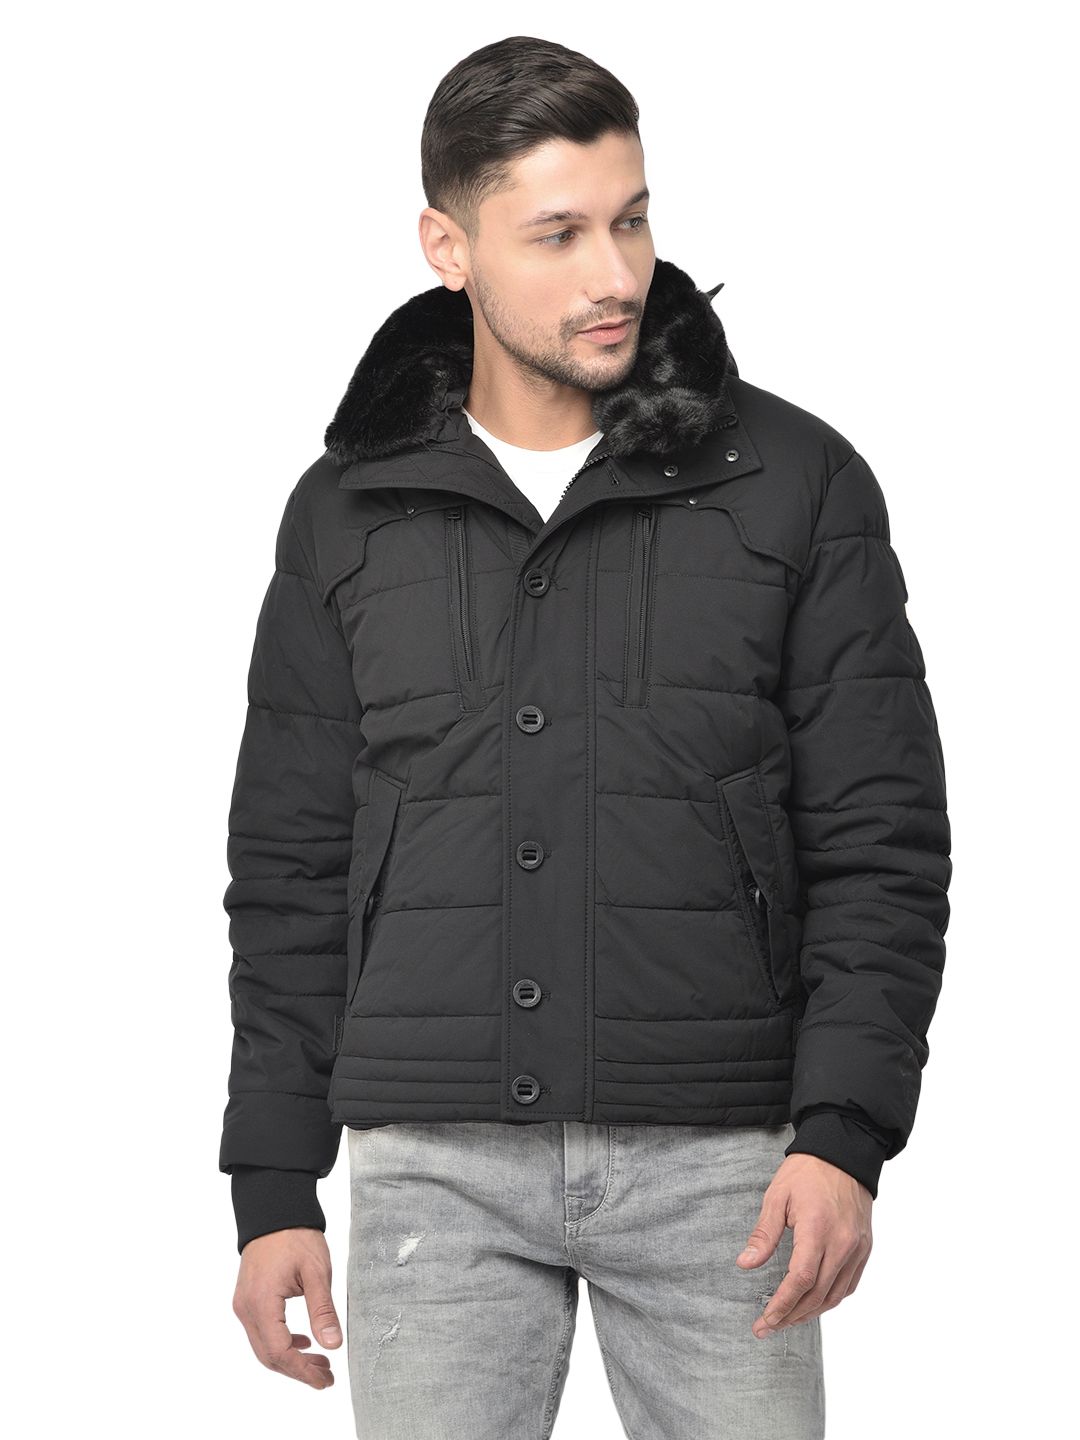 Buy Woodland Mens Polyster Casual Regular Jacket (Black, M) at Amazon.in